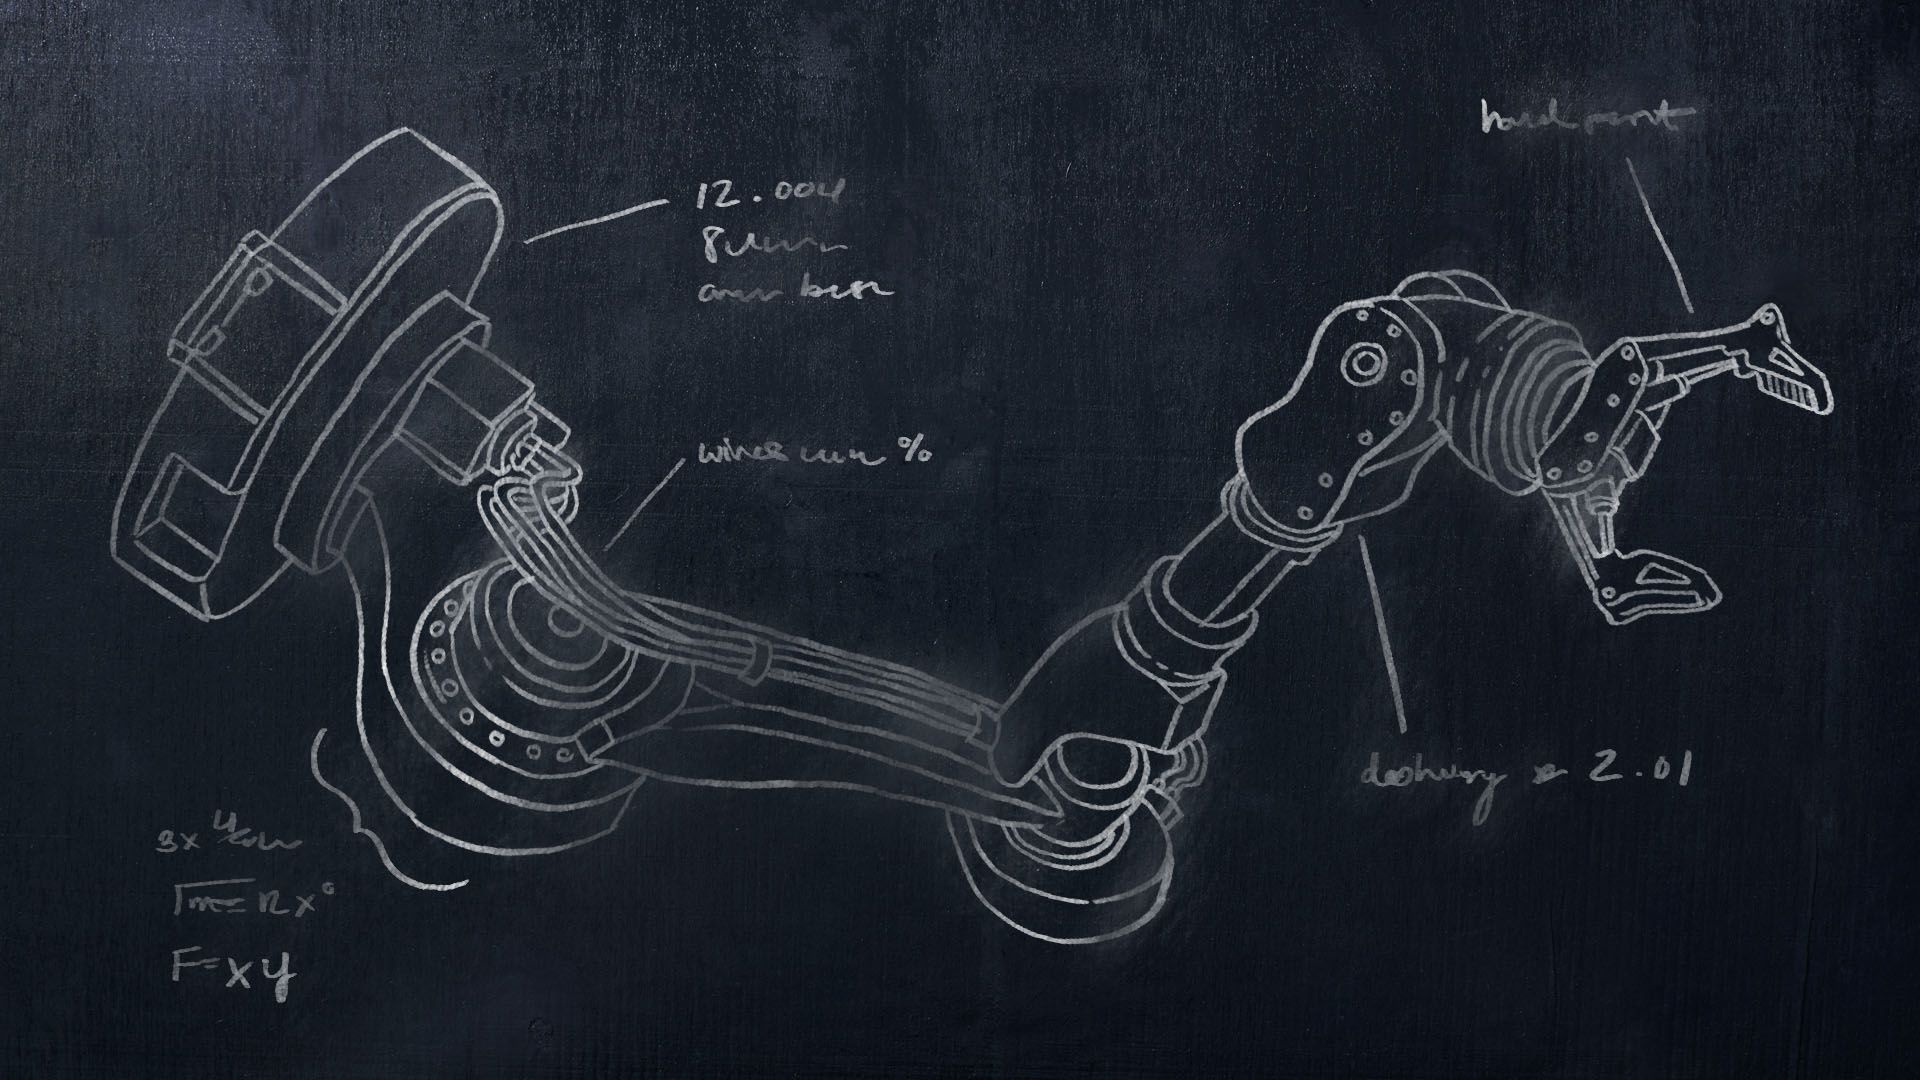 Illustration of a robot hand diagram on a chalkboard